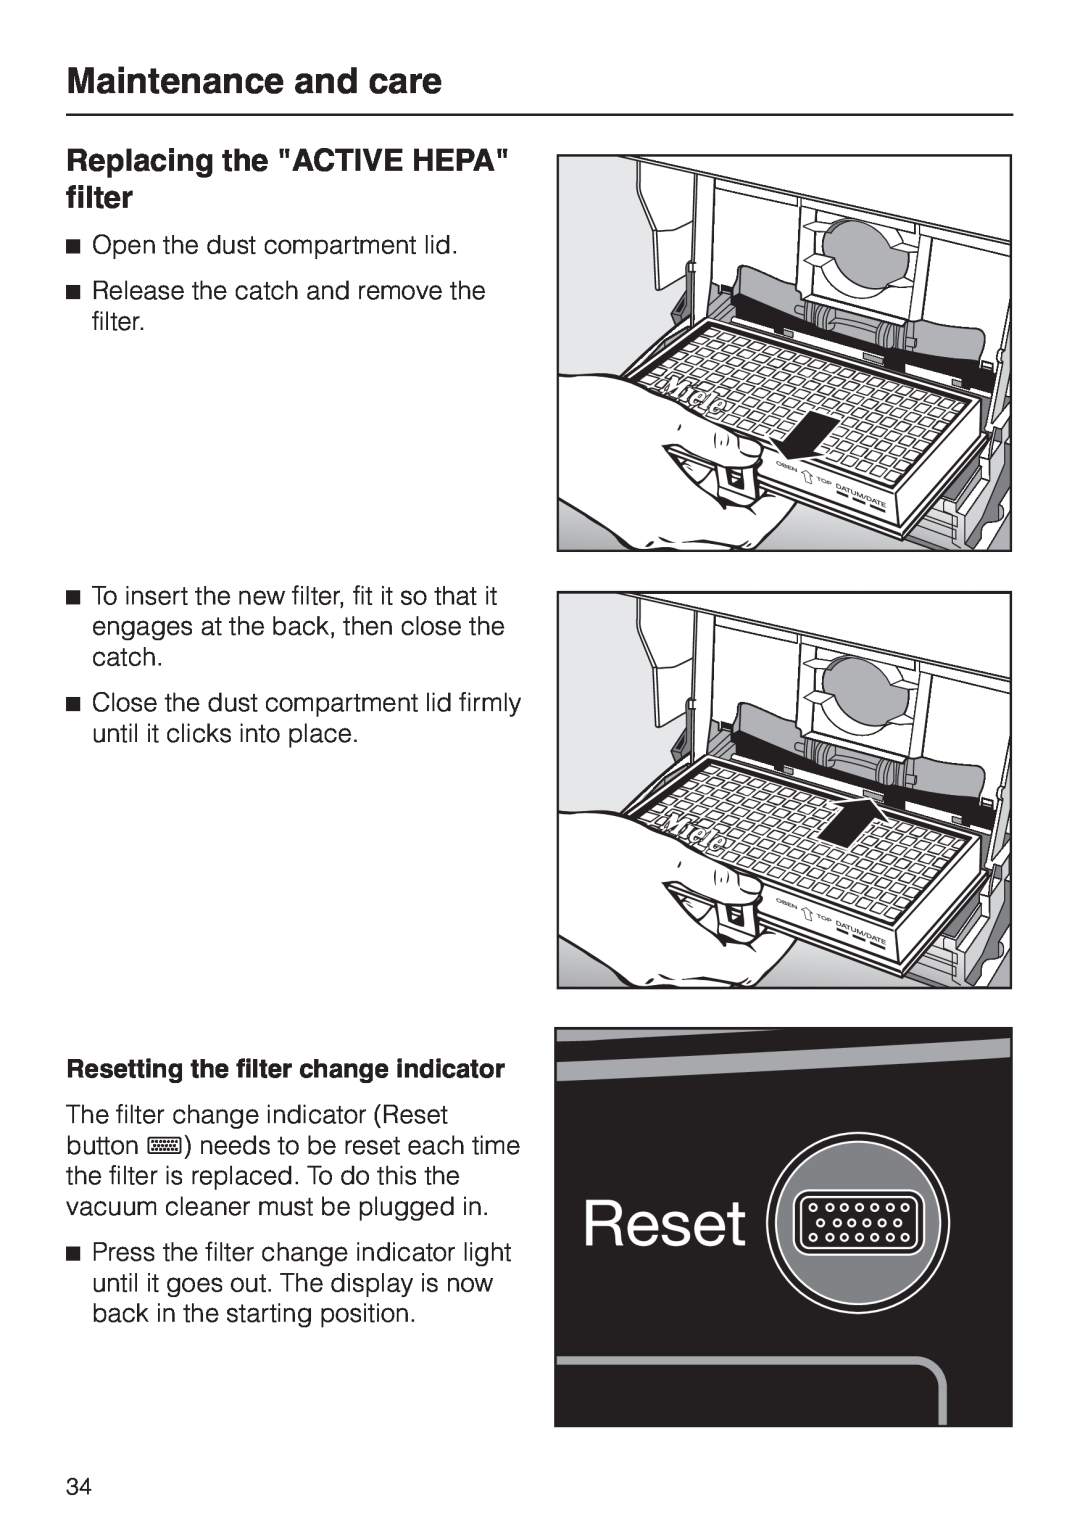 Miele S 558 manual Replacing the ACTIVE HEPA filter, Maintenance and care, Resetting the filter change indicator 